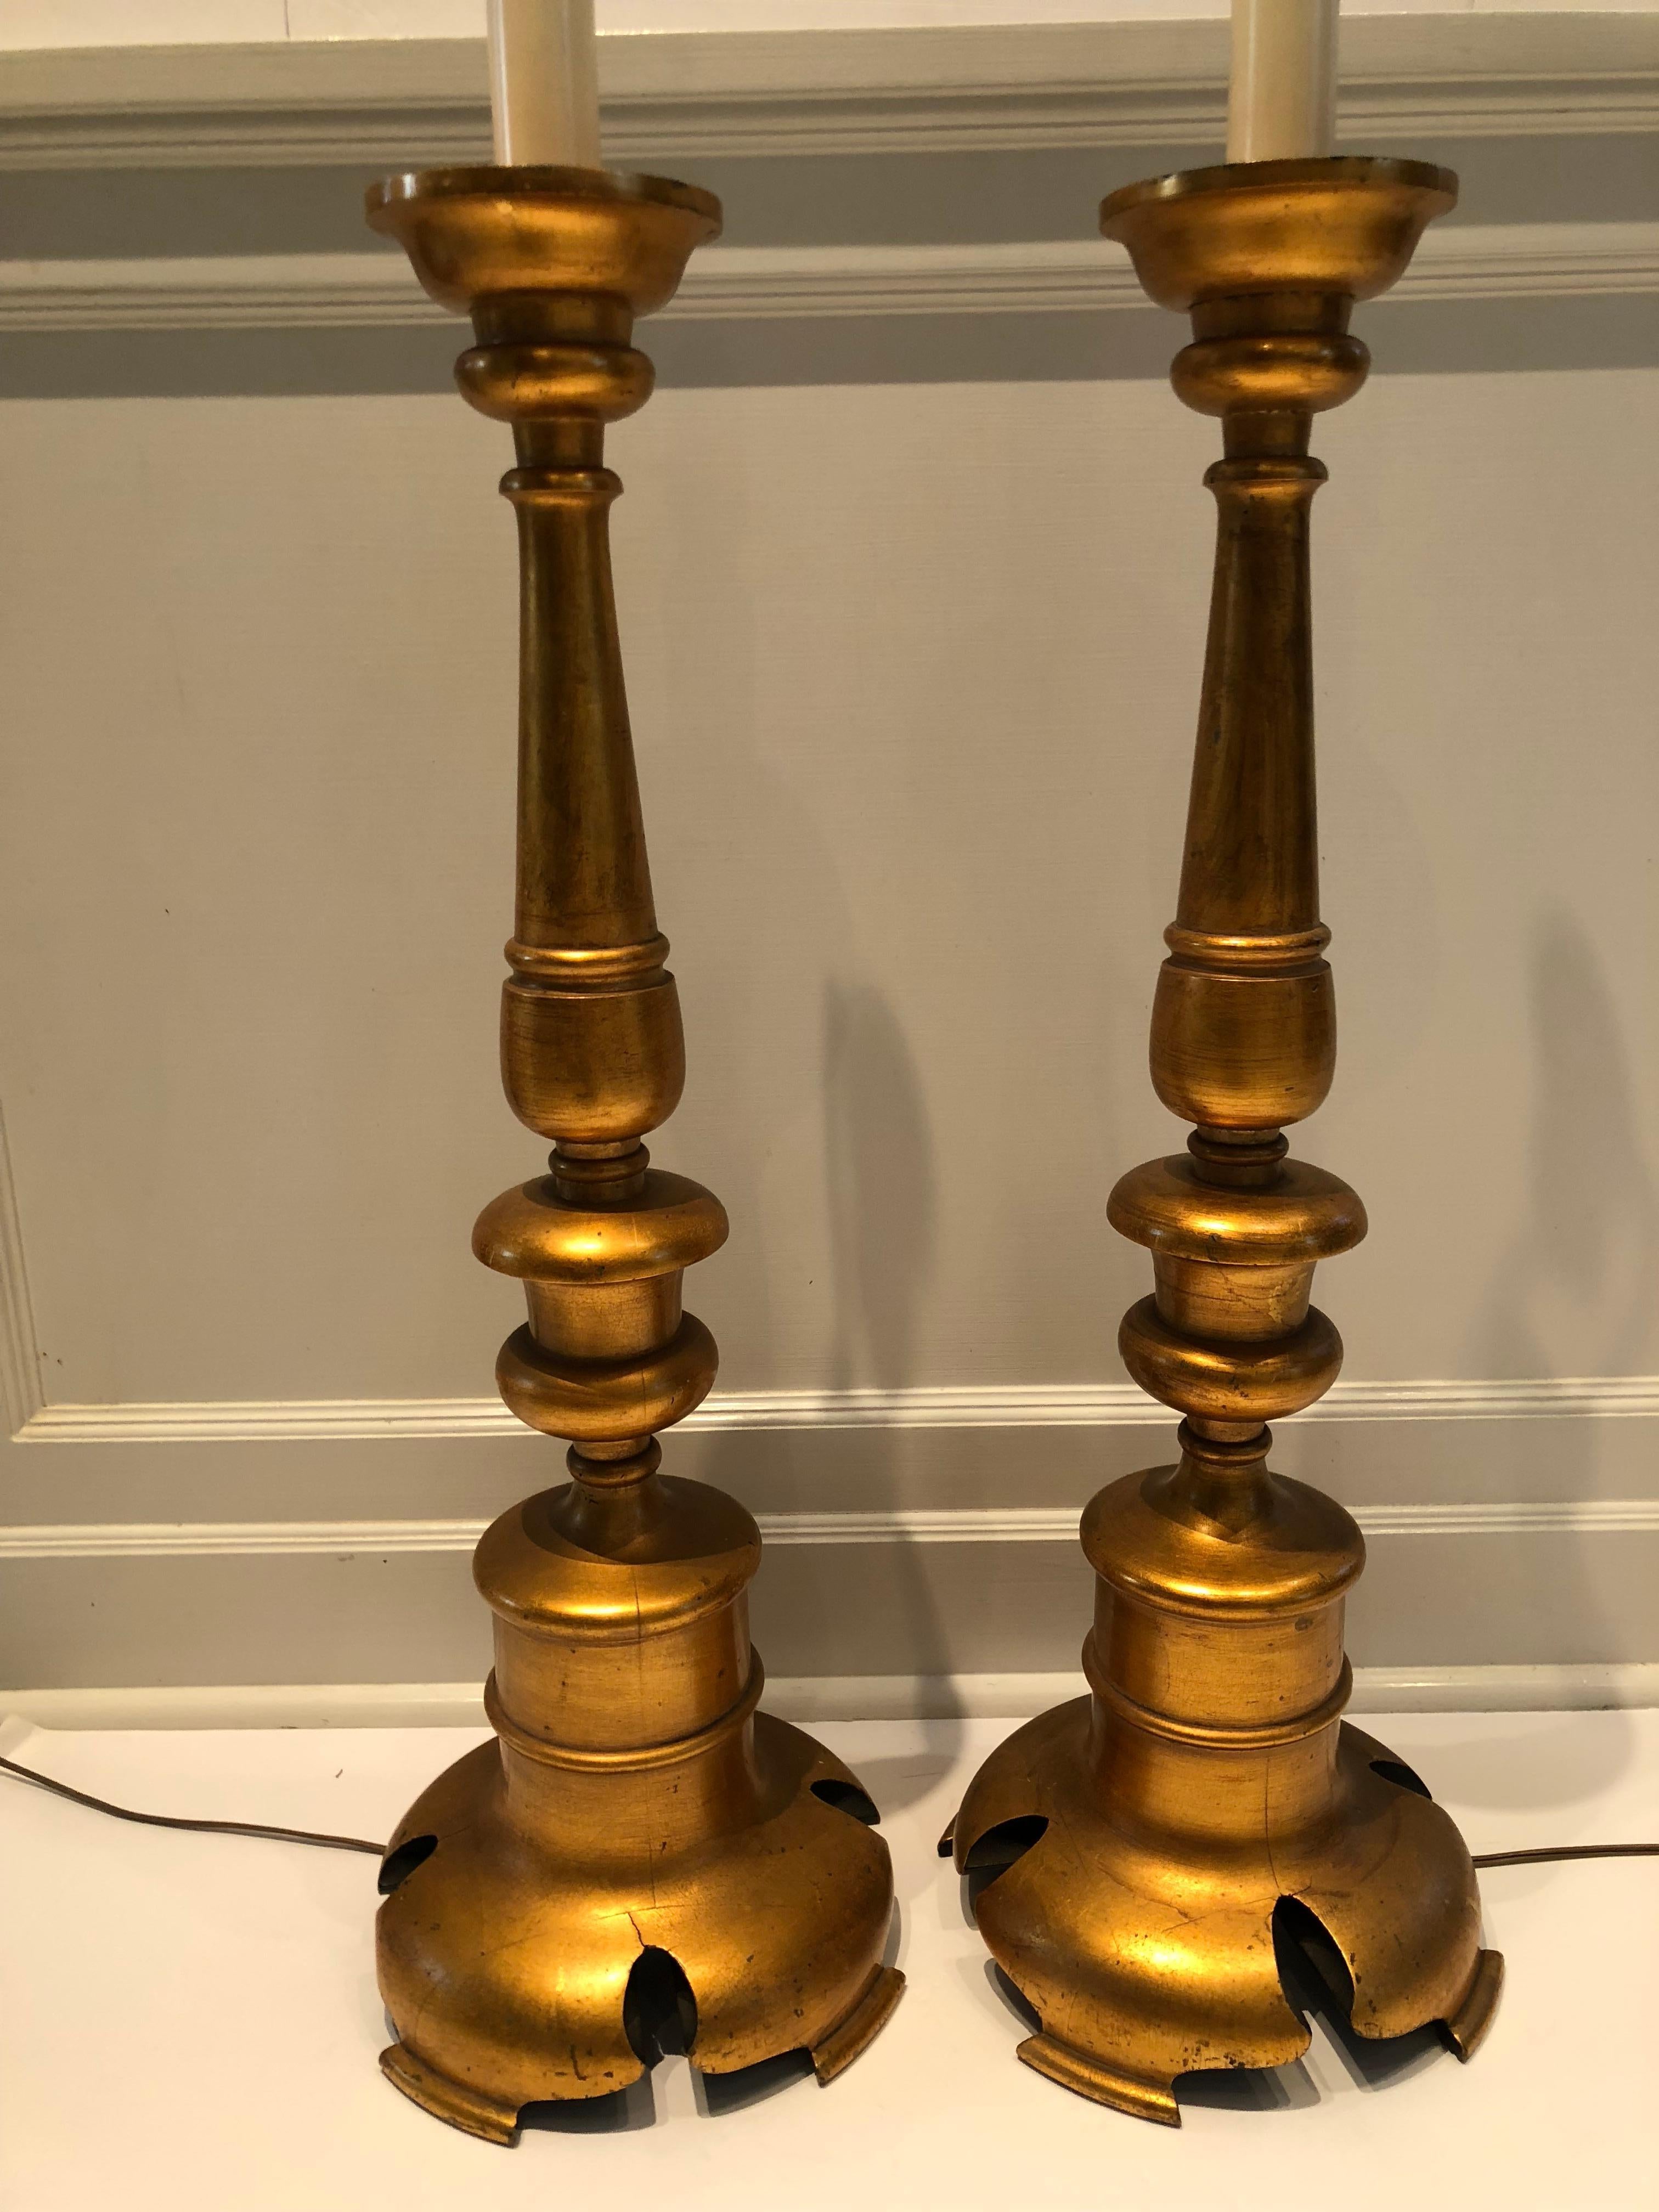 Italian giltwood columns with custom black shades lined in metallic gold. Round black ball finial. Base is 10